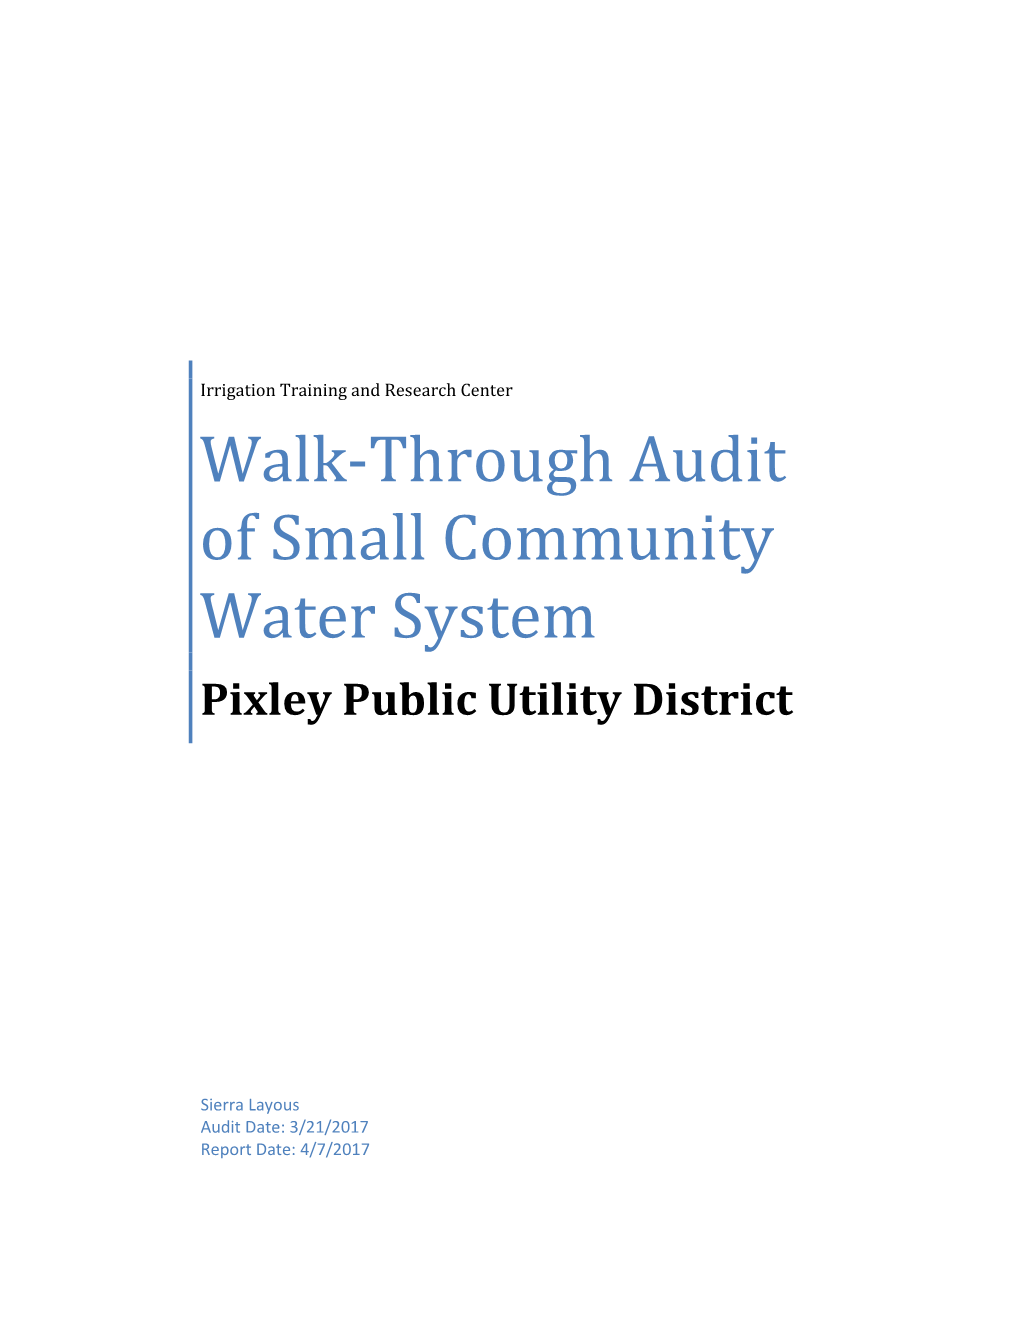 Municipal Water System Water/Energy Audit